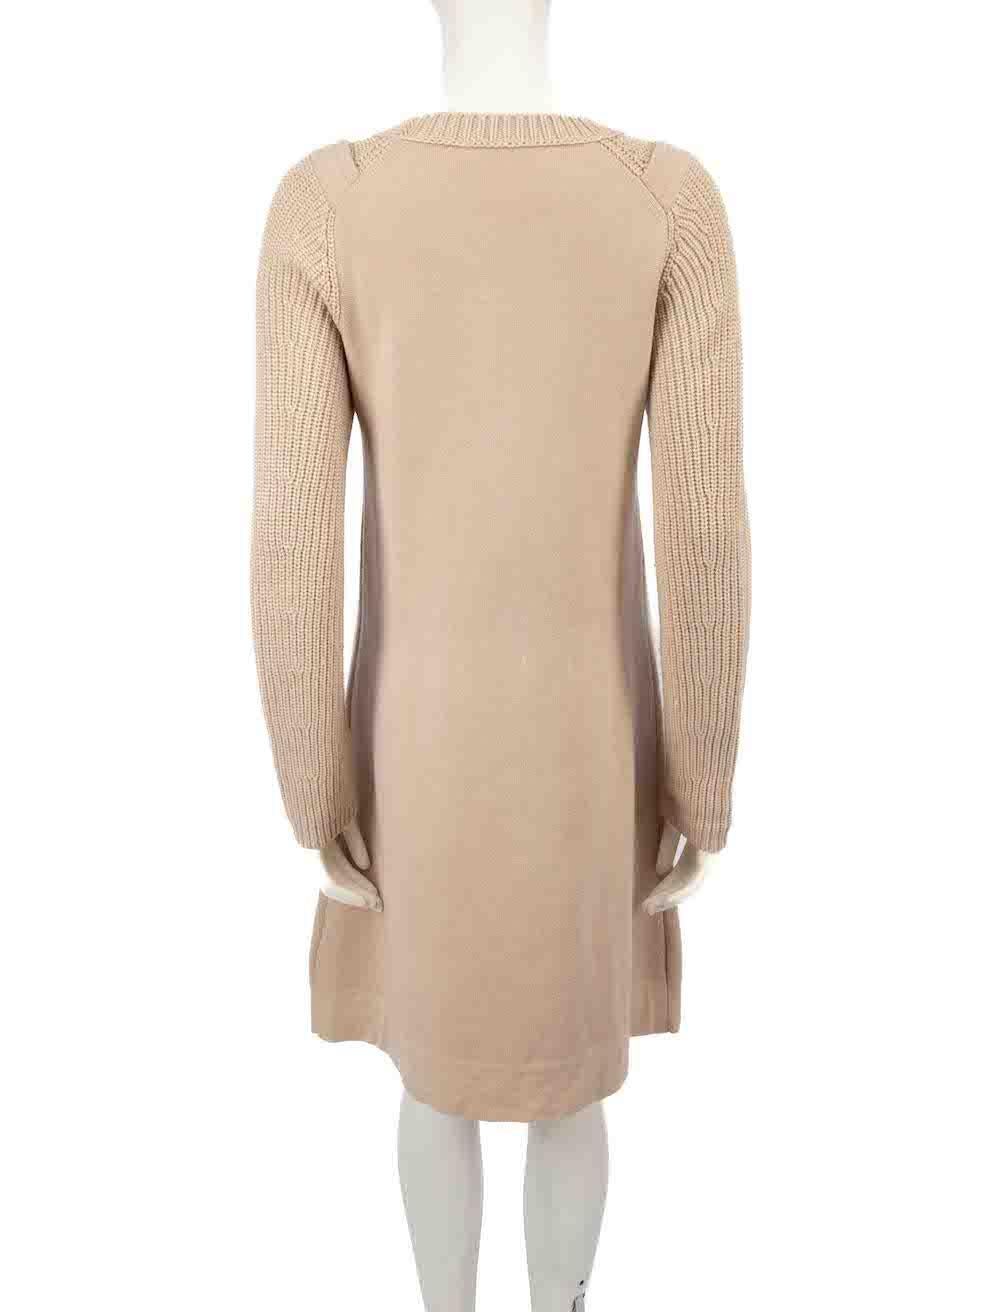 Chloé Rope Beige Wool Knit Dress Size M In Excellent Condition For Sale In London, GB